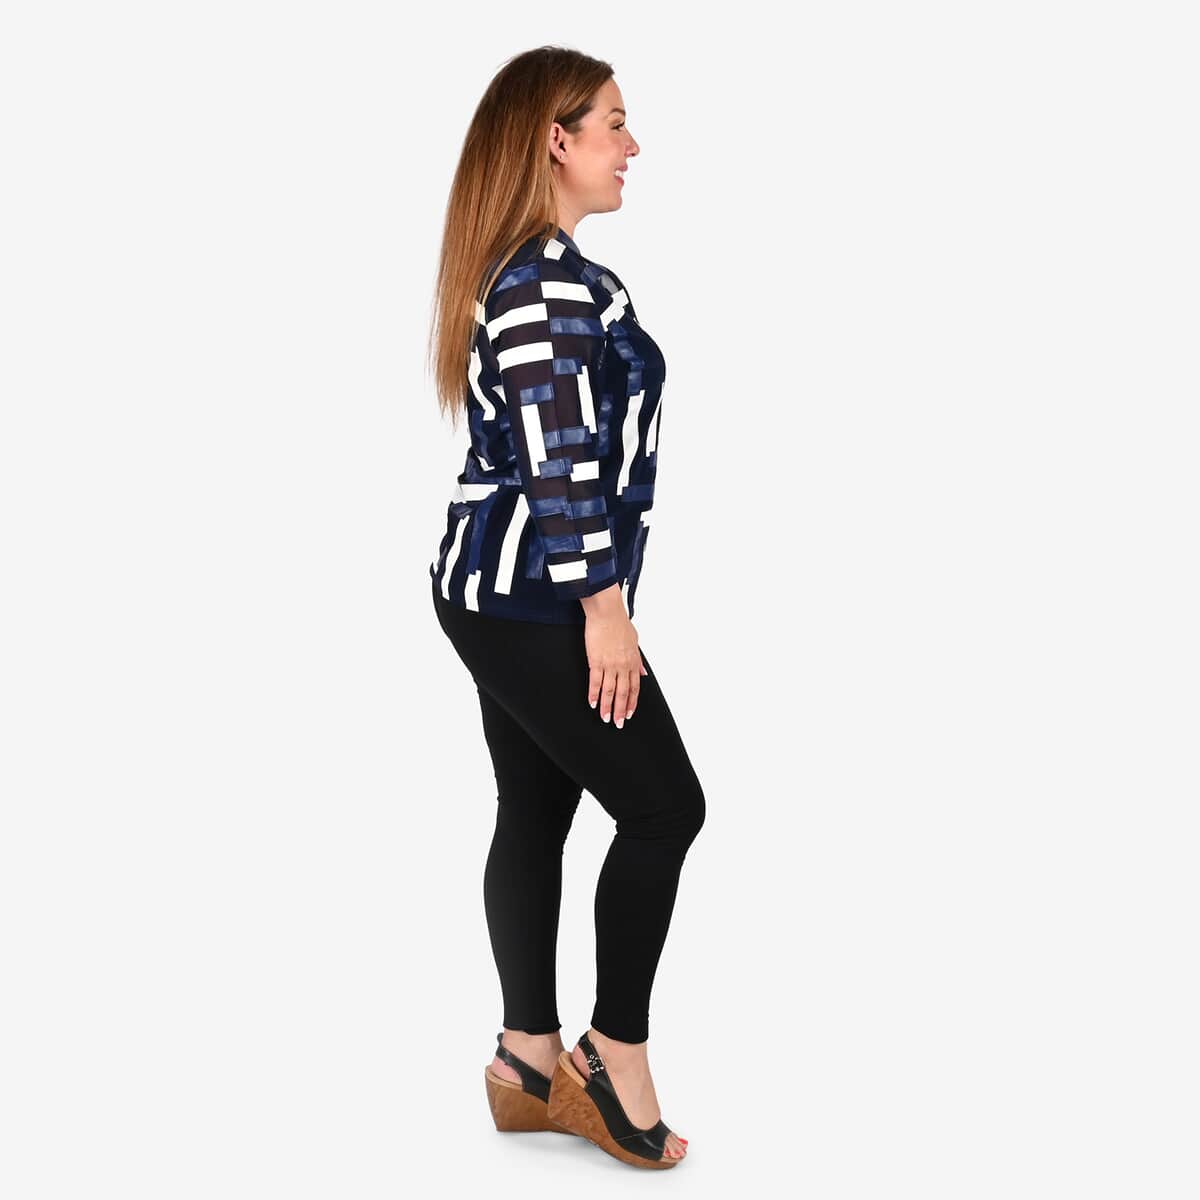 TAMSY Navy and White Patchwork Jacket - XS image number 2